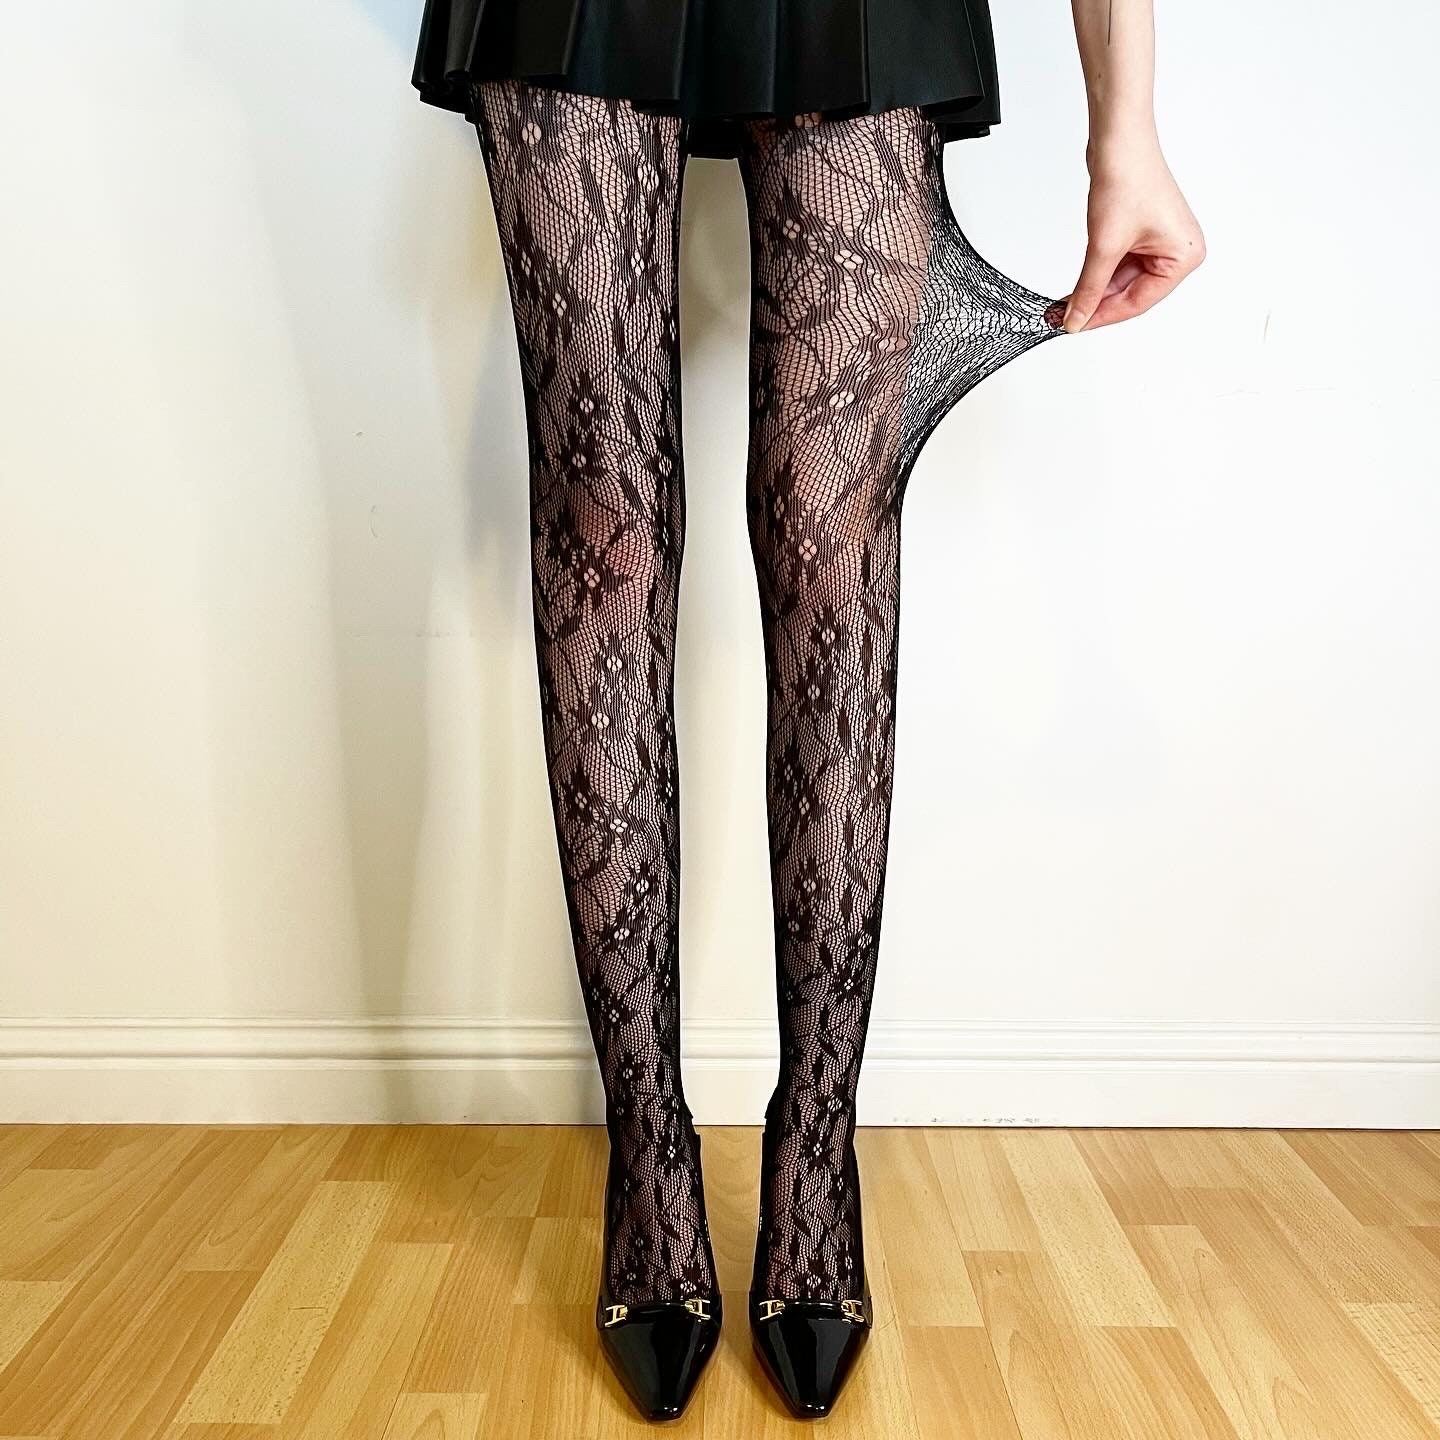 OPAQUE LACE TIGHTS IN BLACK